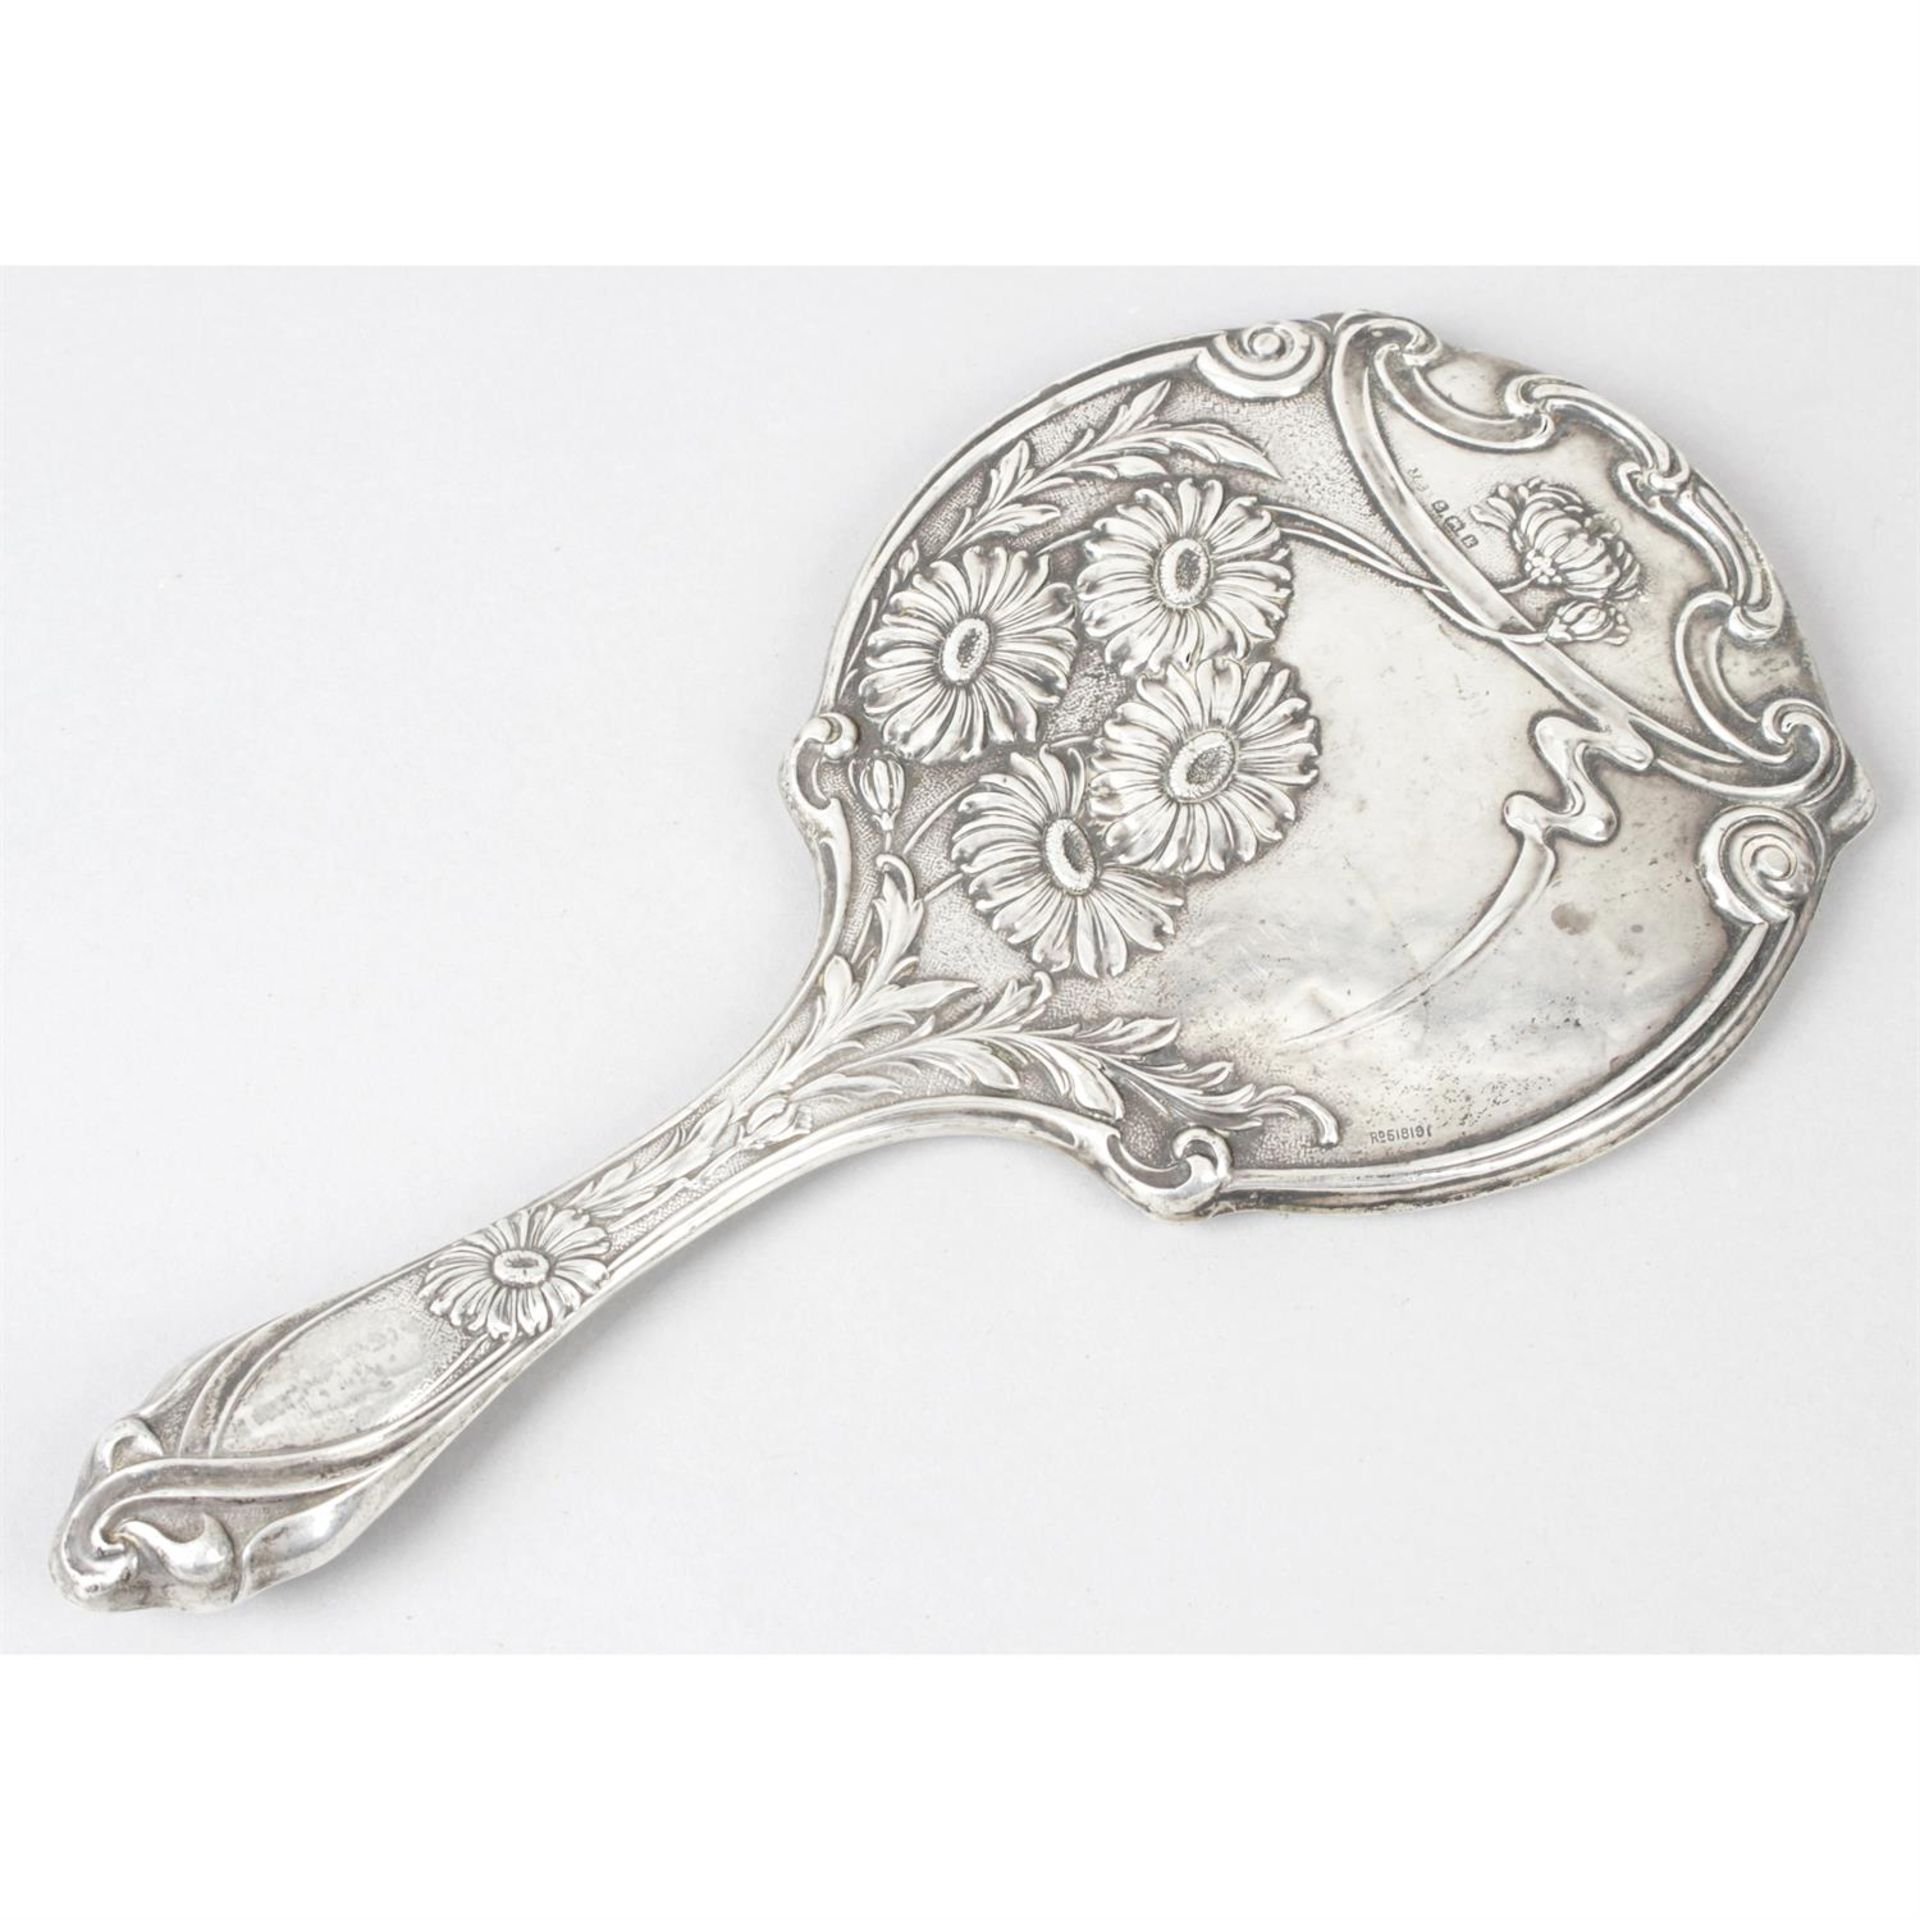 An Edwardian silver mounted Art Nouveau style hand-held mirror.